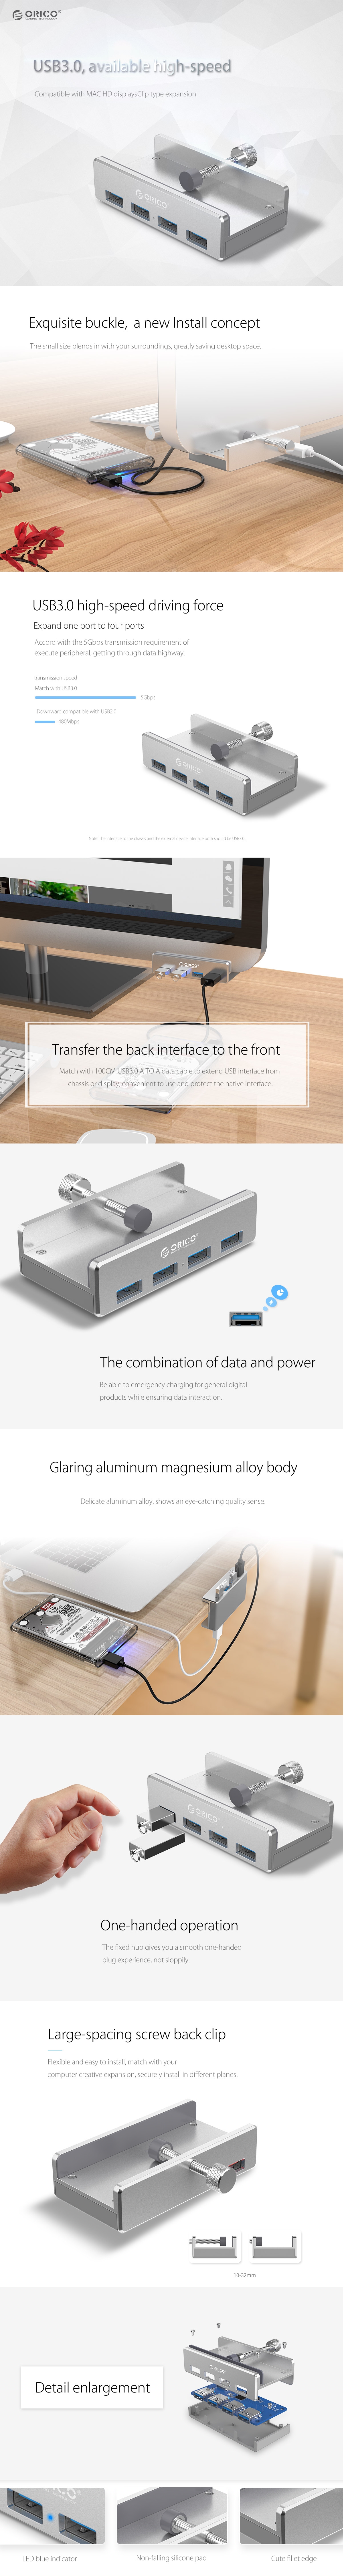 A large marketing image providing additional information about the product ORICO 4 Port USB 3.0 Clip-Type Hub - Additional alt info not provided